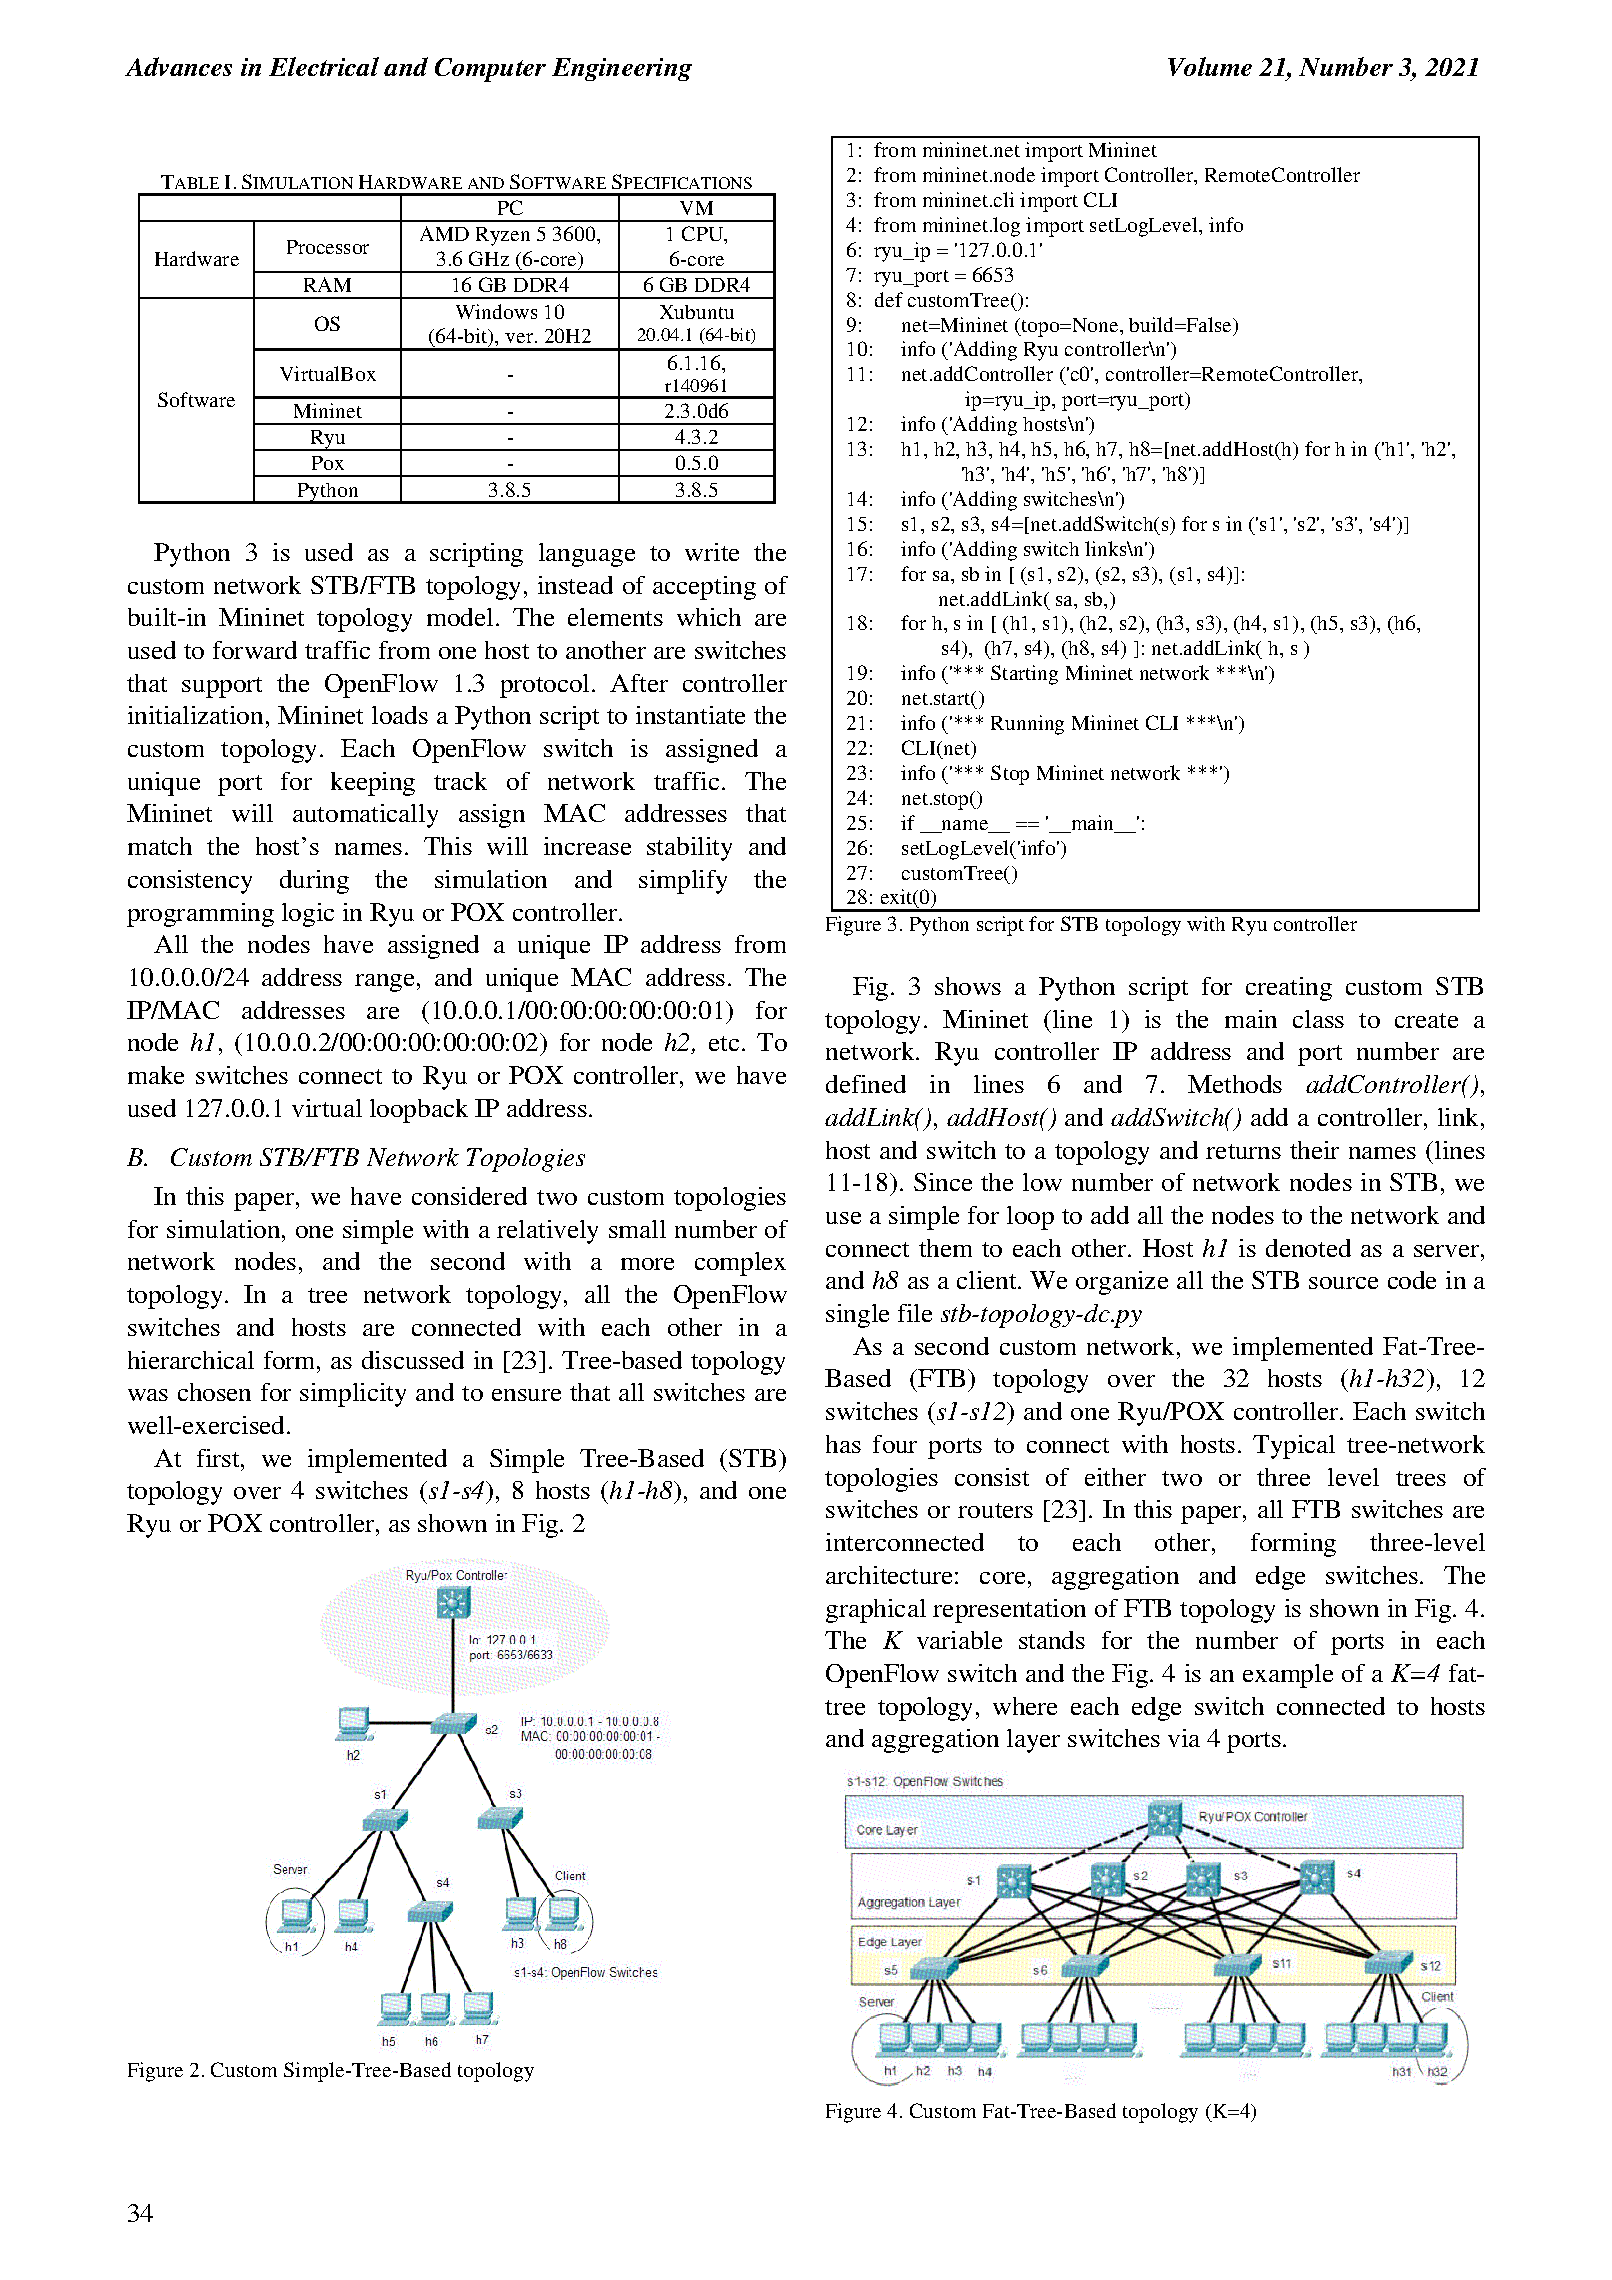 PDF Quickview for paper with DOI:10.4316/AECE.2021.03004